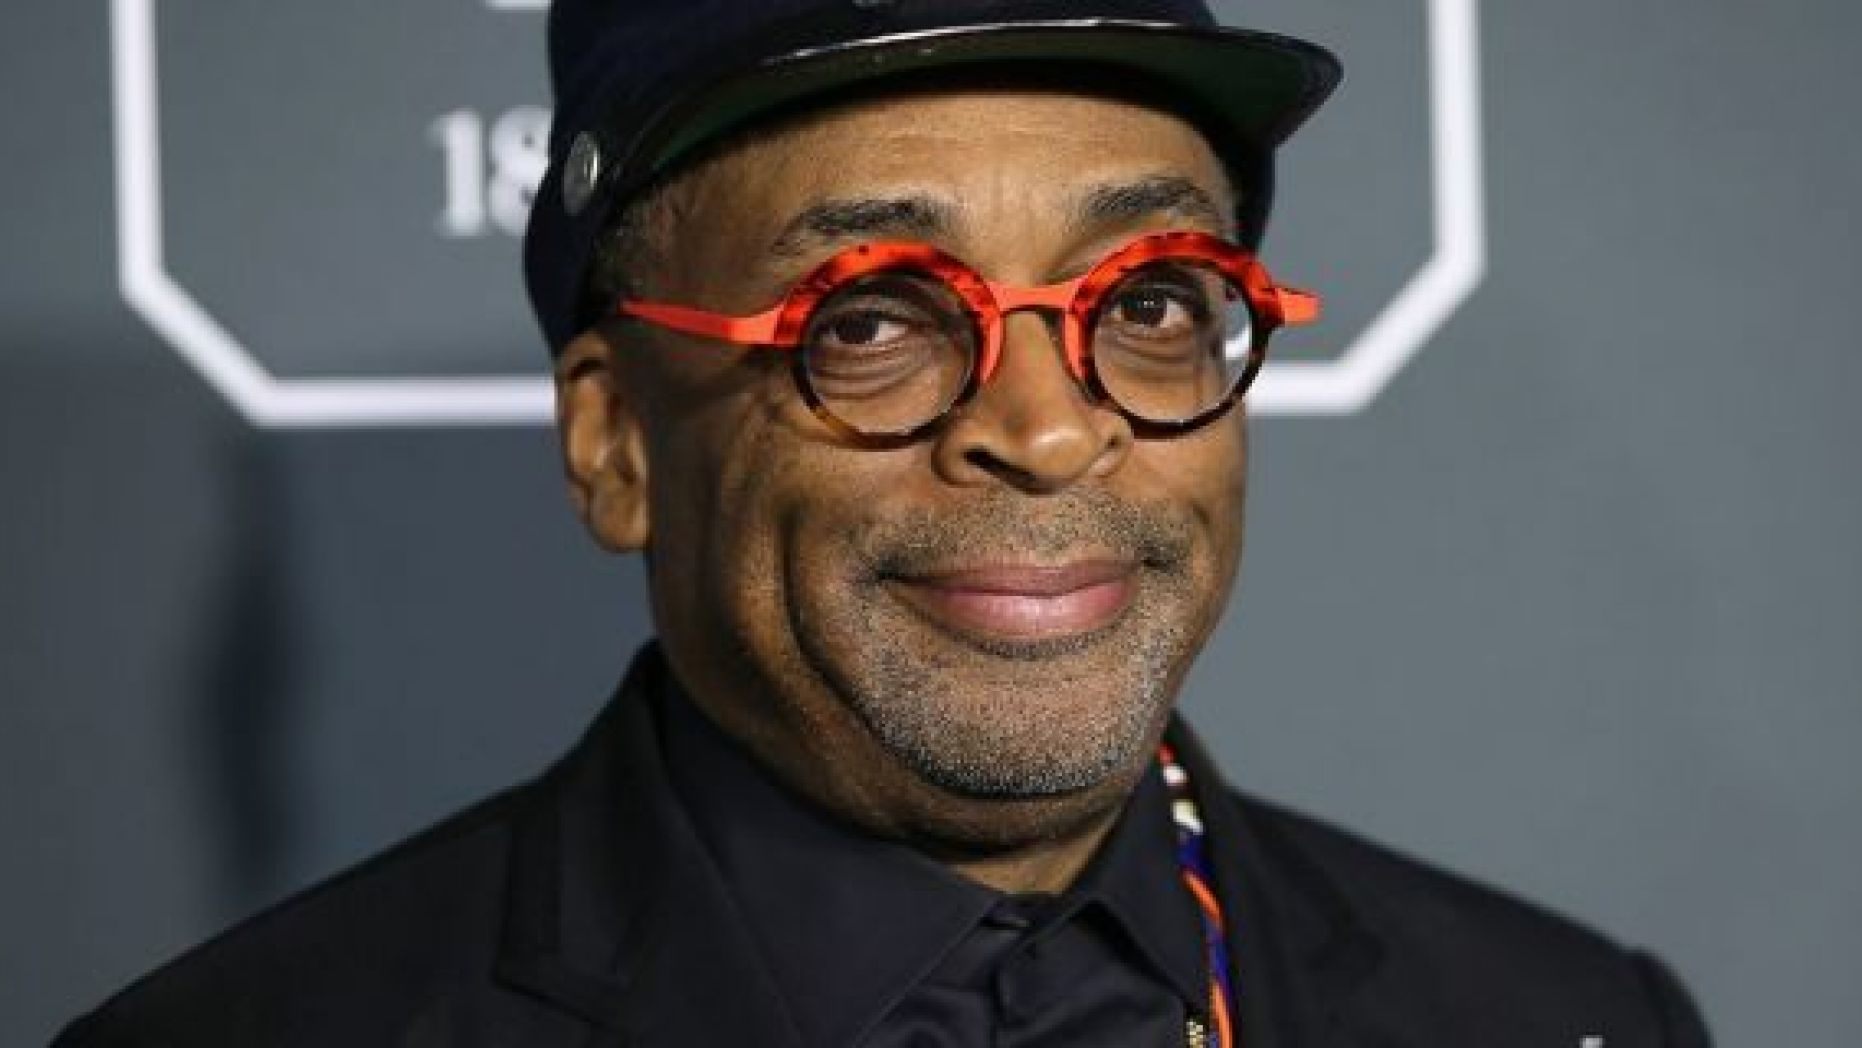 “BlacKkKlansman” director Spike Lee made reference to explorer Christopher Columbus during an interview Wednesday morning by describing him as a “terrorist” and saying that he thinks the United States needs to be truthful about the country’s past.